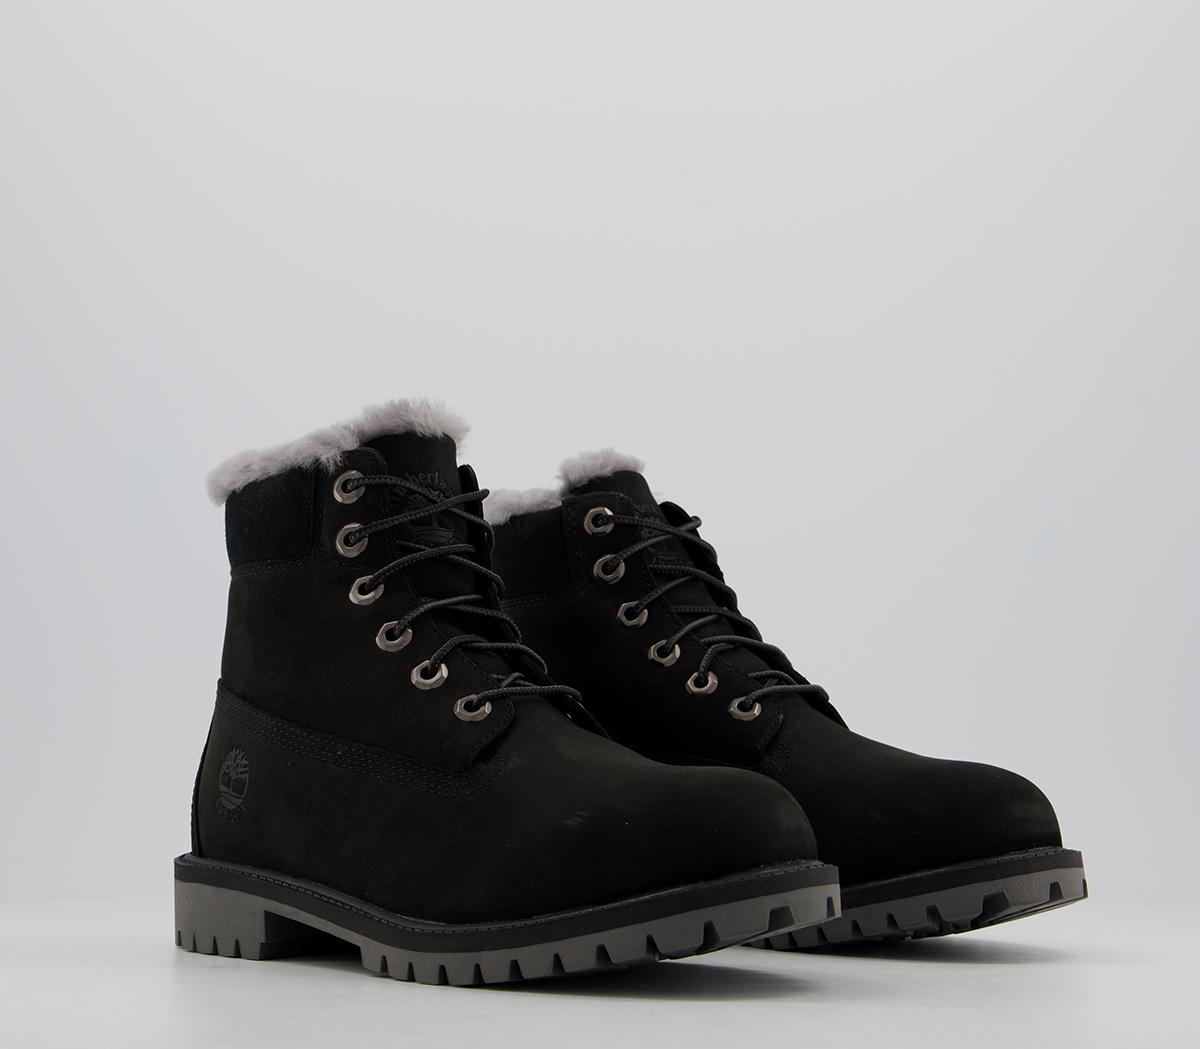 Timberland 6 Inch Fur Lined Junior Boots Black - Ankle Boots